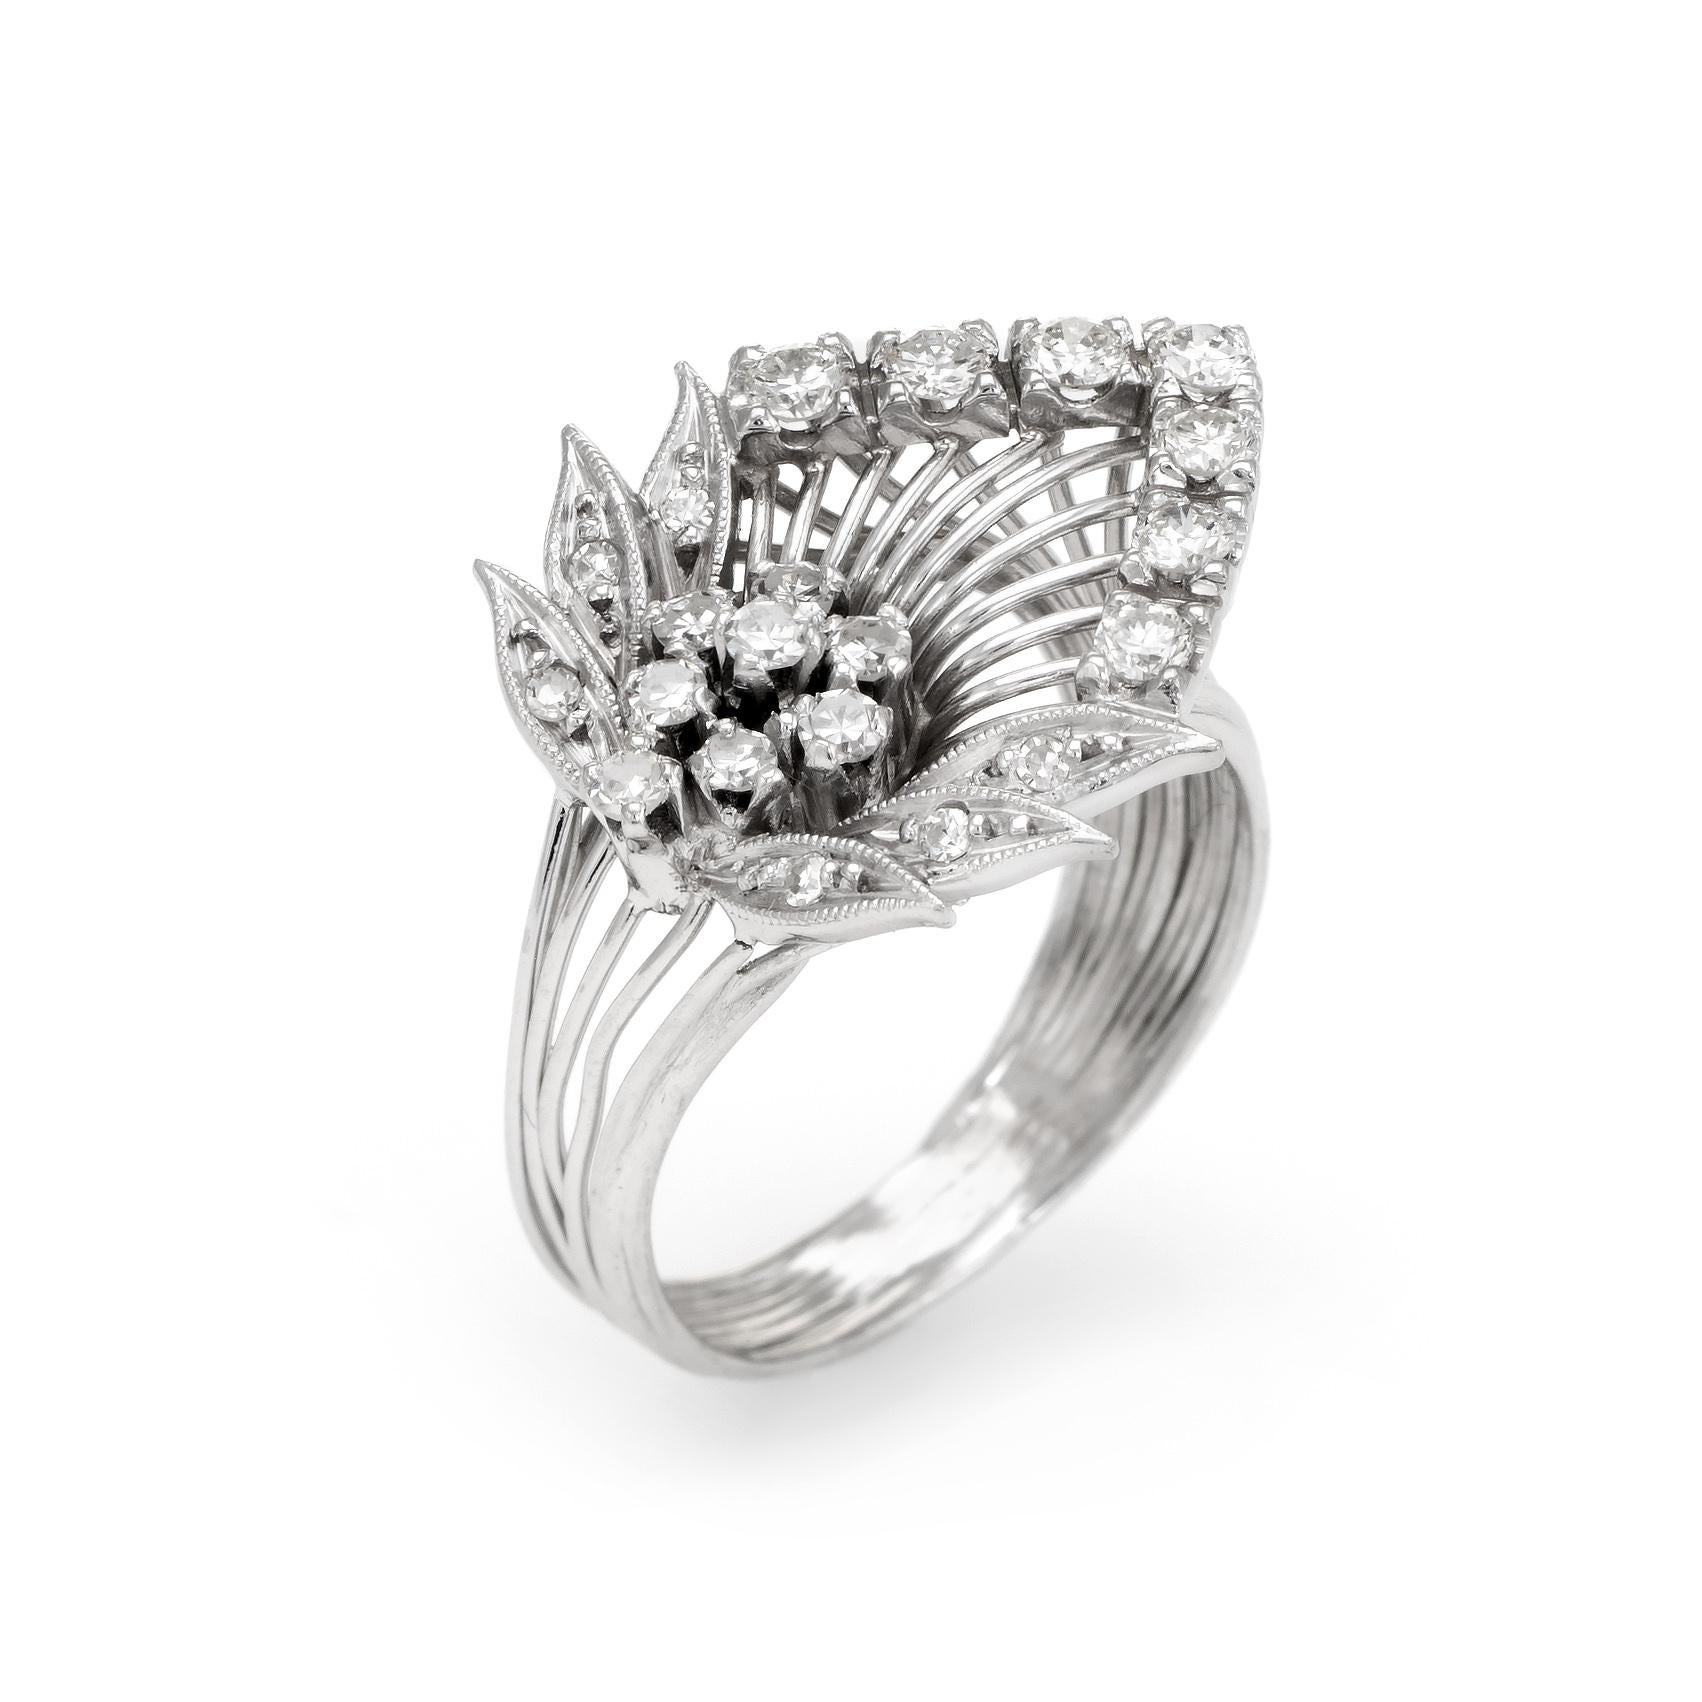 Finely detailed vintage diamond cocktail ring (circa 1950s to 1960s), crafted in 900 platinum. 

Round brilliant and single cut diamonds graduate in size from 0.01 to 0.04 carats, totaling an estimated 0.58 cartas (estimated at H-I color and VS2-SI1